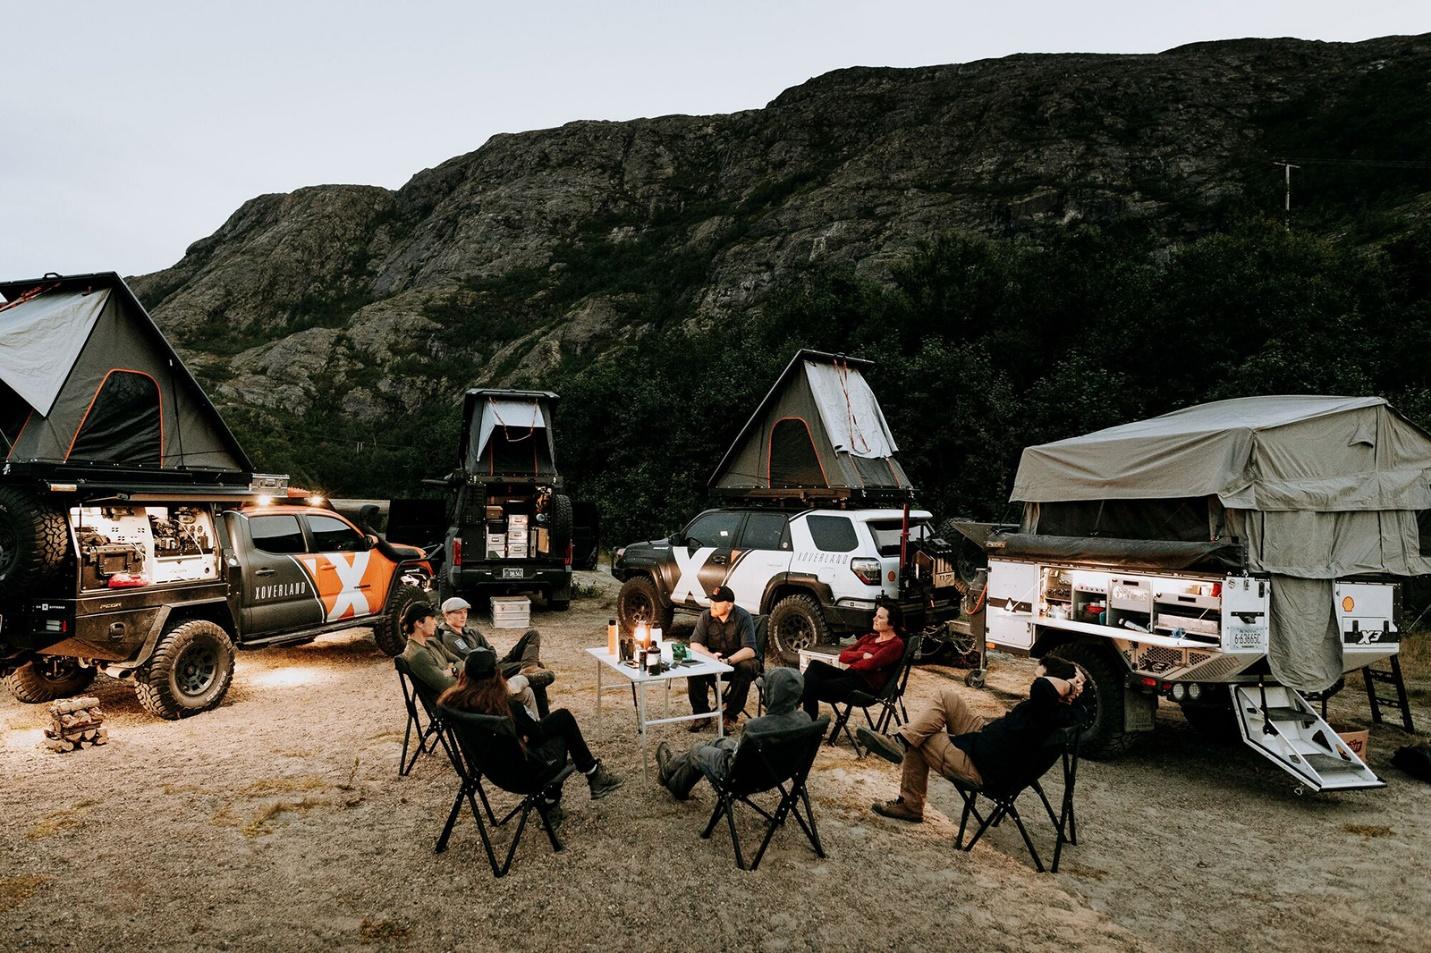 People sitting in chairs outside with off-road tents and campers in the background